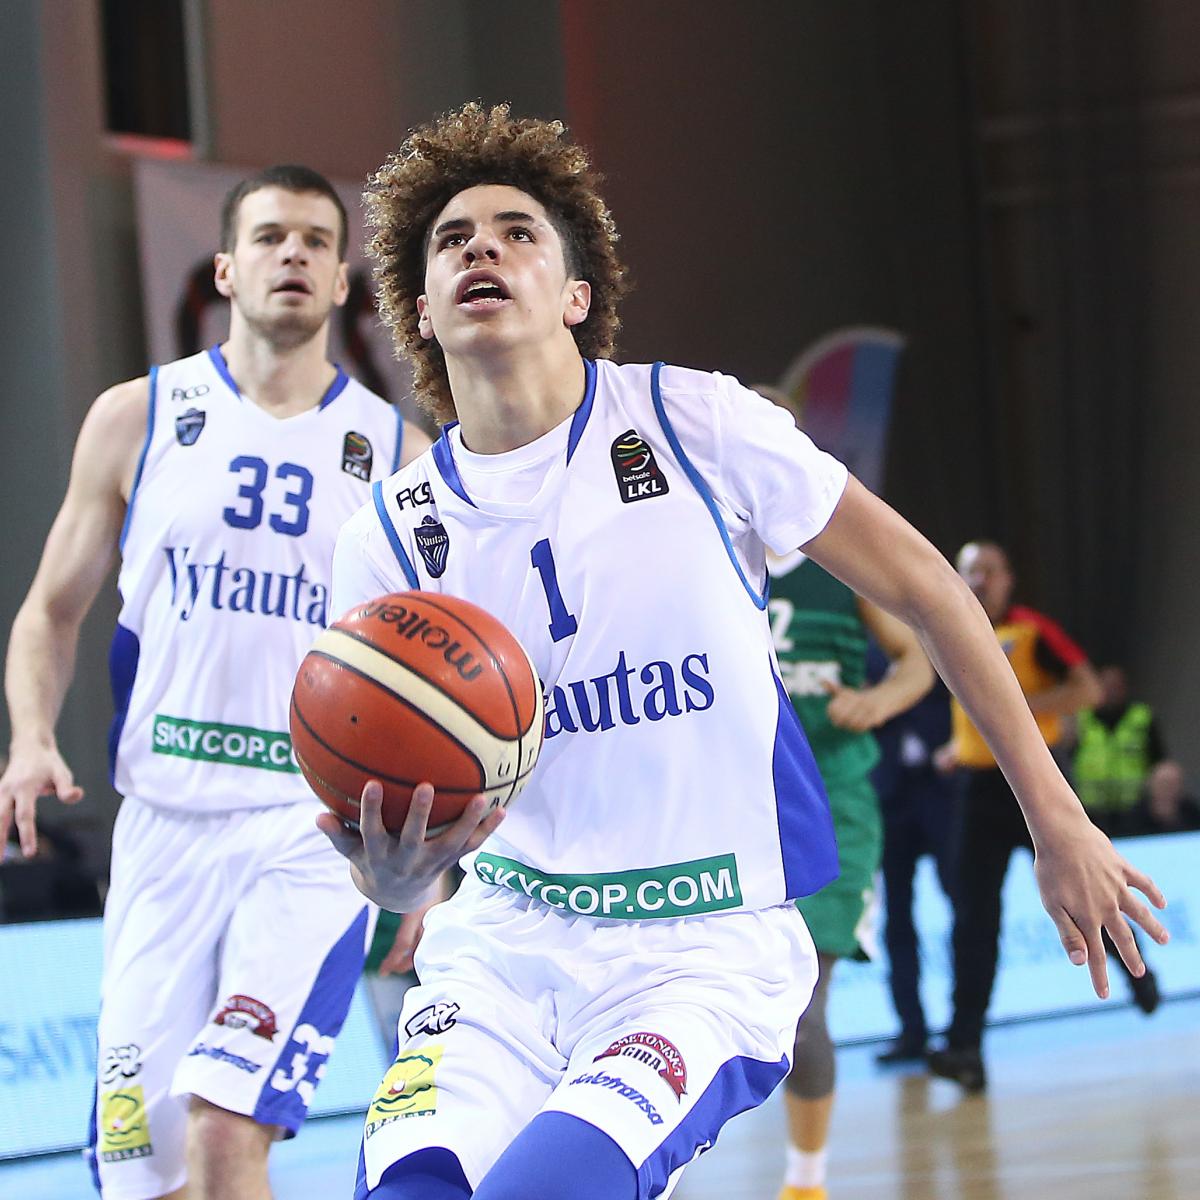 LaMelo Ball is statistical oddity for Los Angeles Ballers in JBA